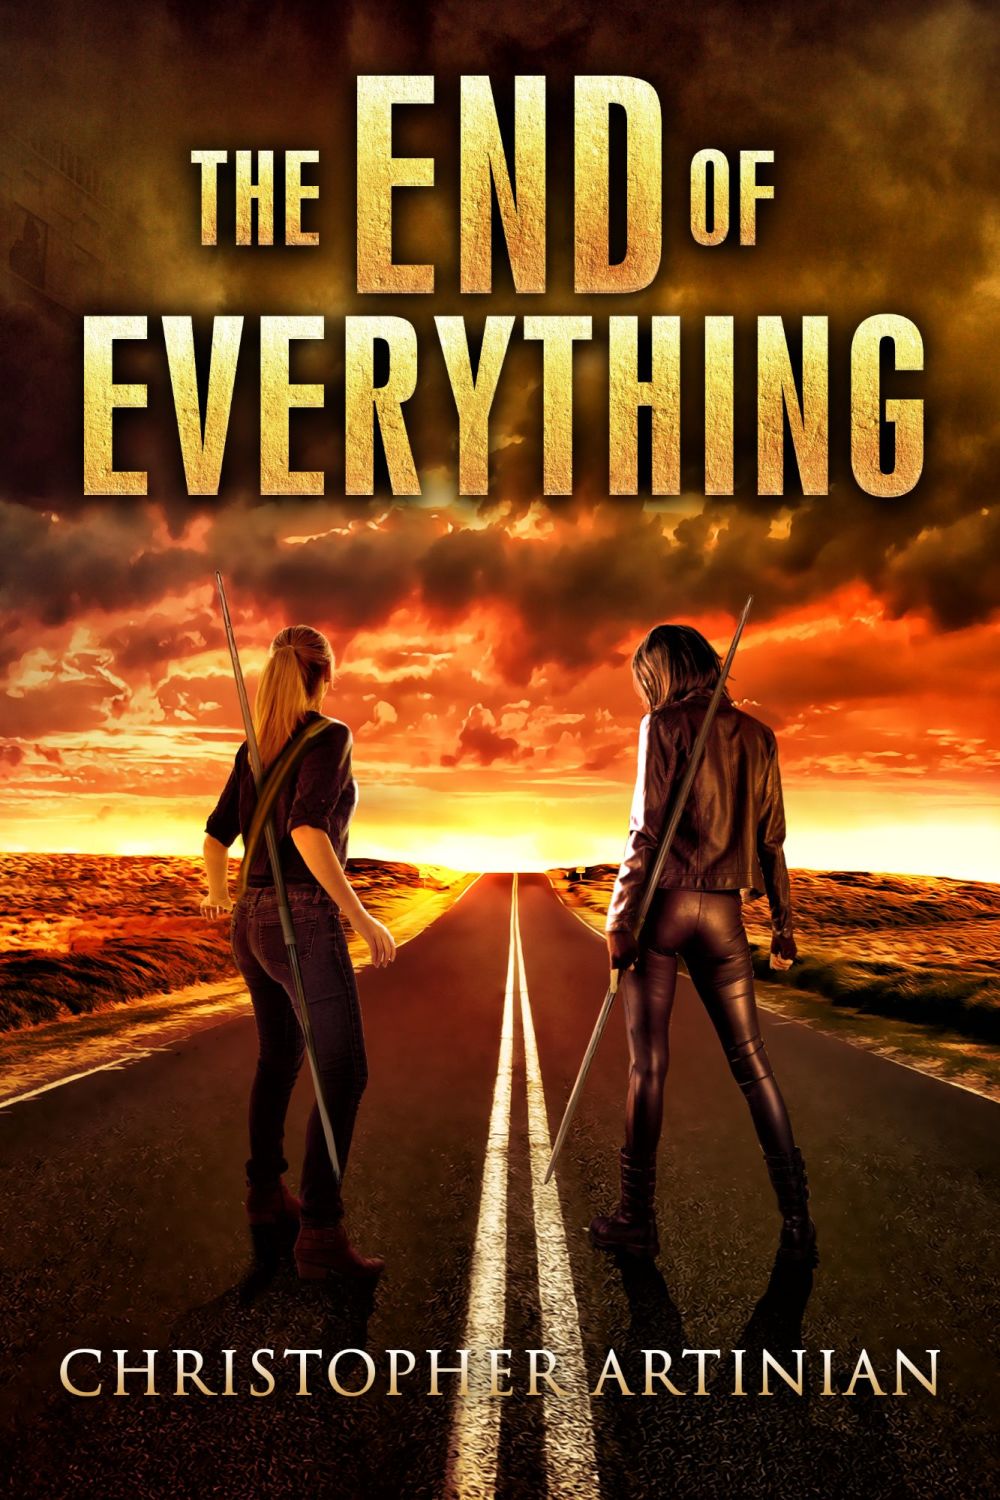 THE END OF EVERYTHING: BOOK 1 (SIGNED A4 PRINT)